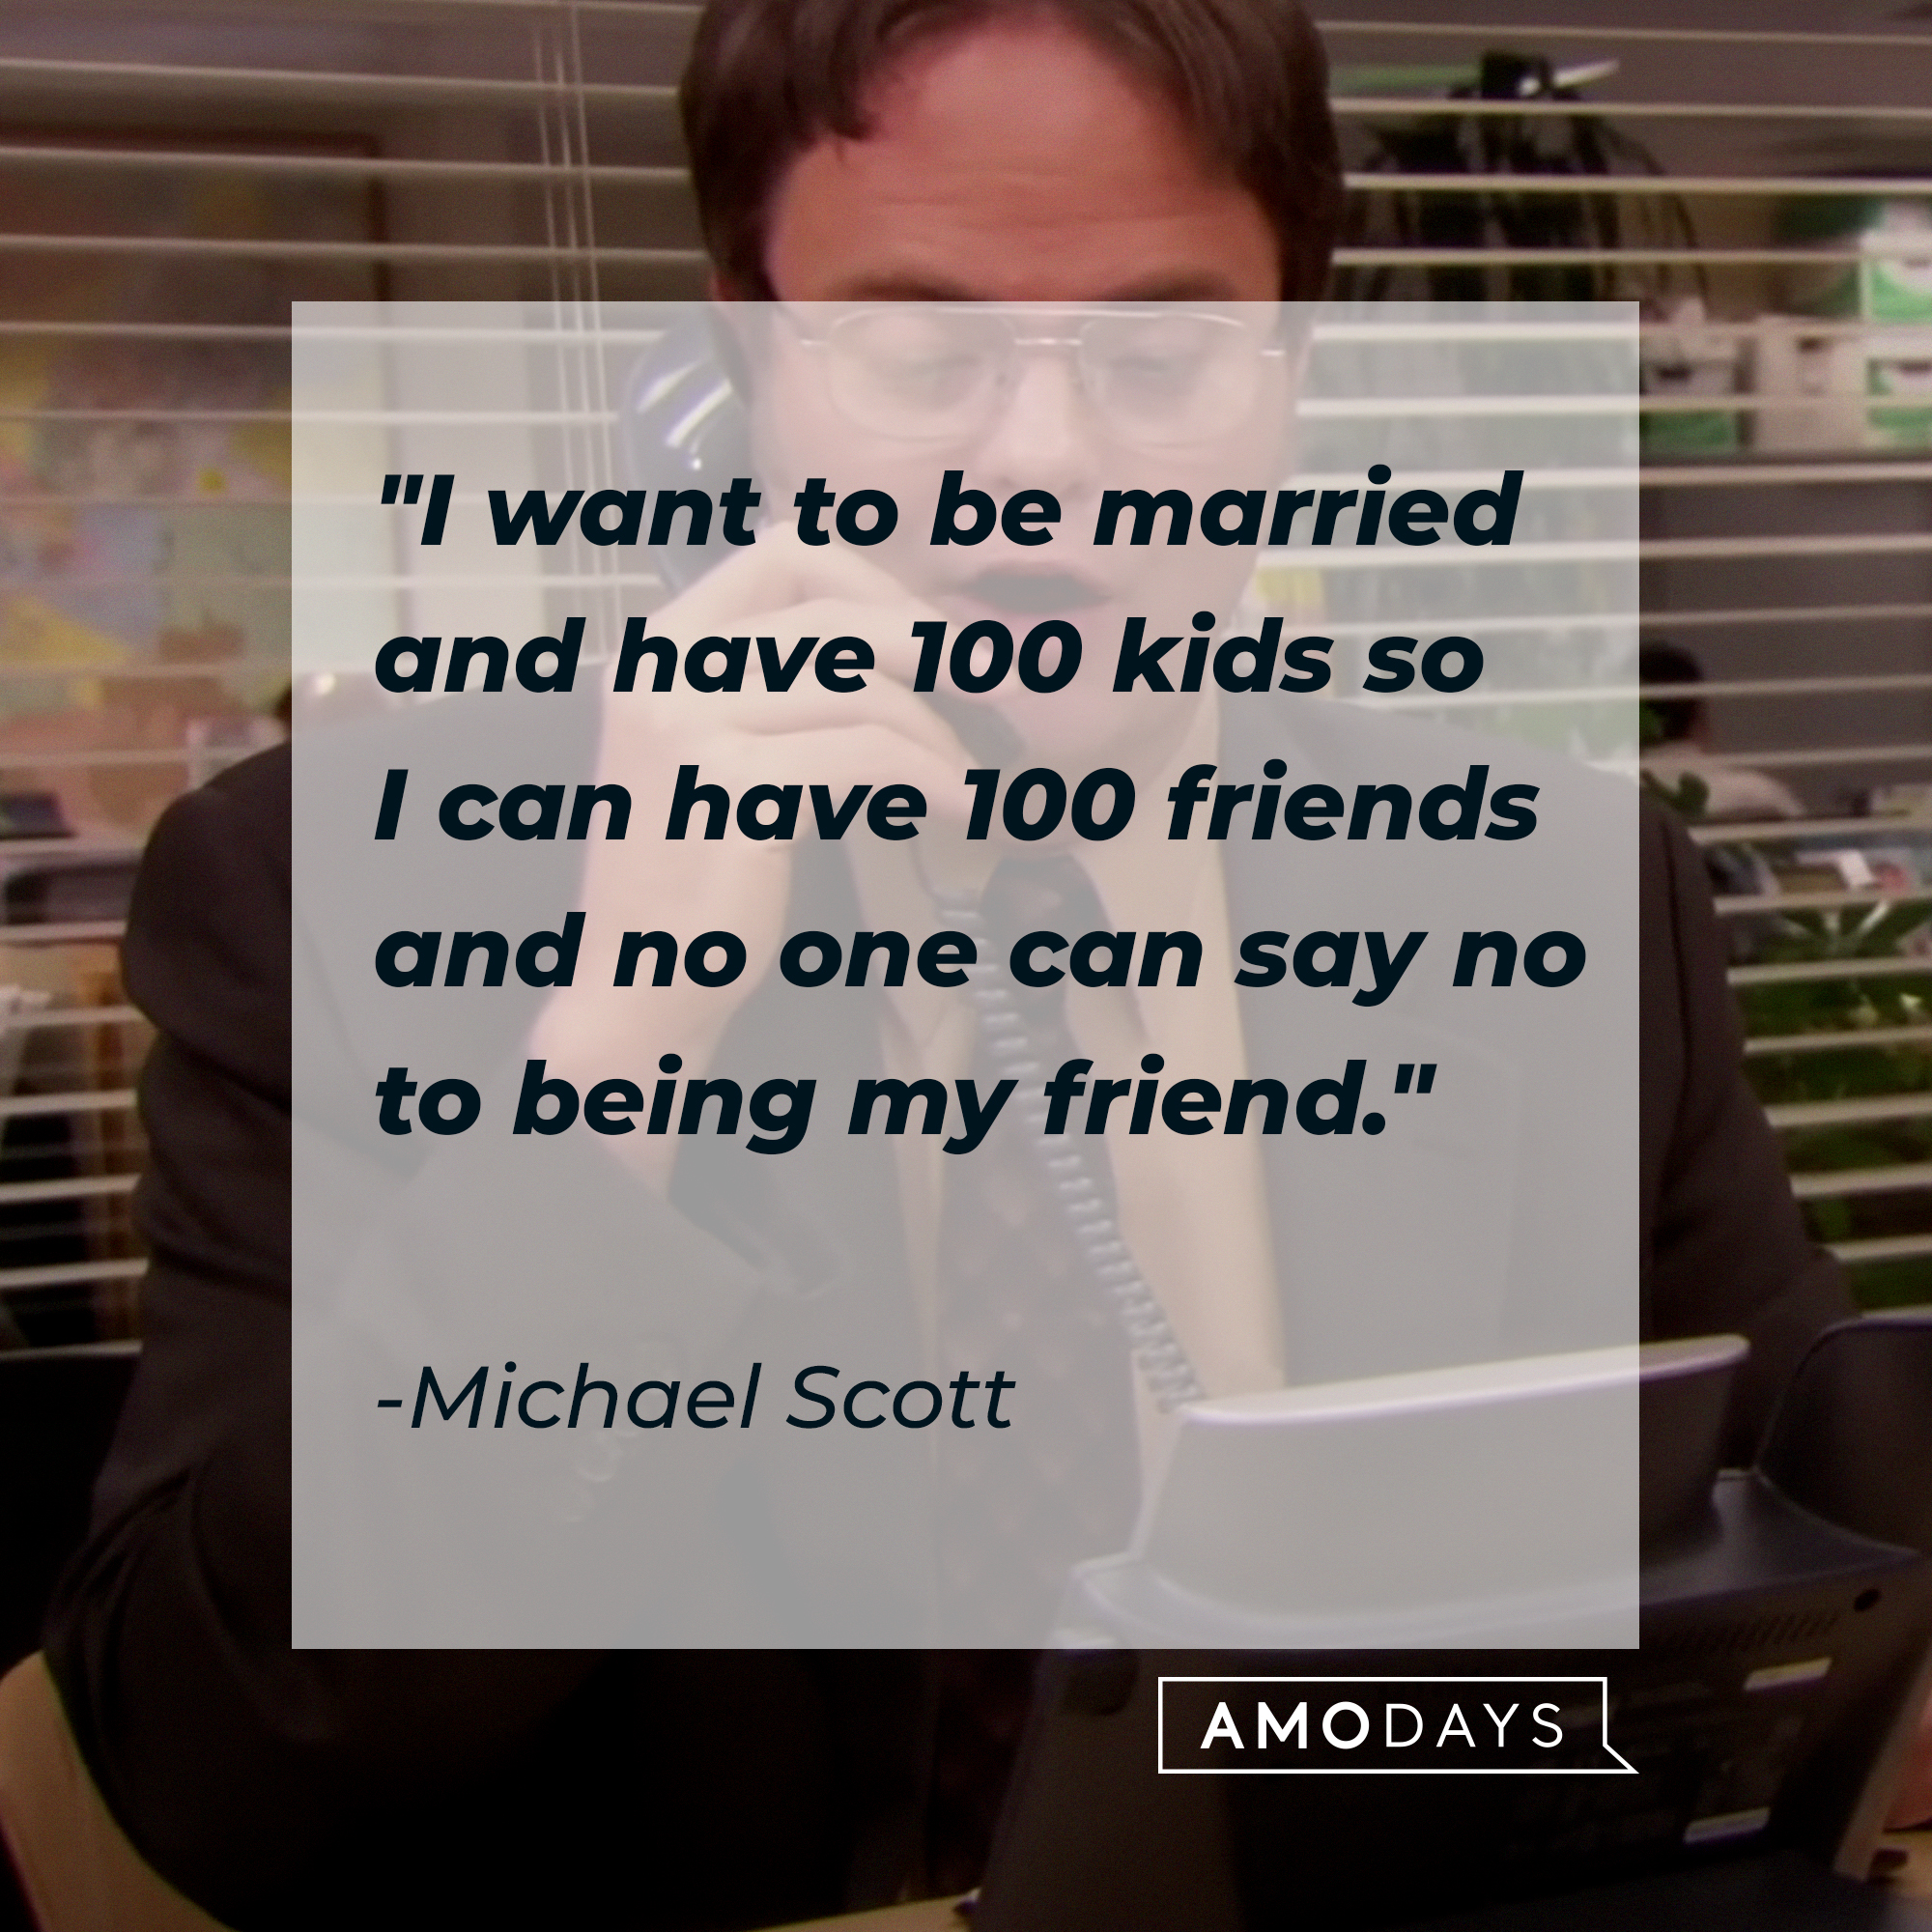 Michael Scott's quote: "I want to be married and have 100 kids so I can have 100 friends and no one can say no to being my friend" | Source: Youtube.com/TheOffice